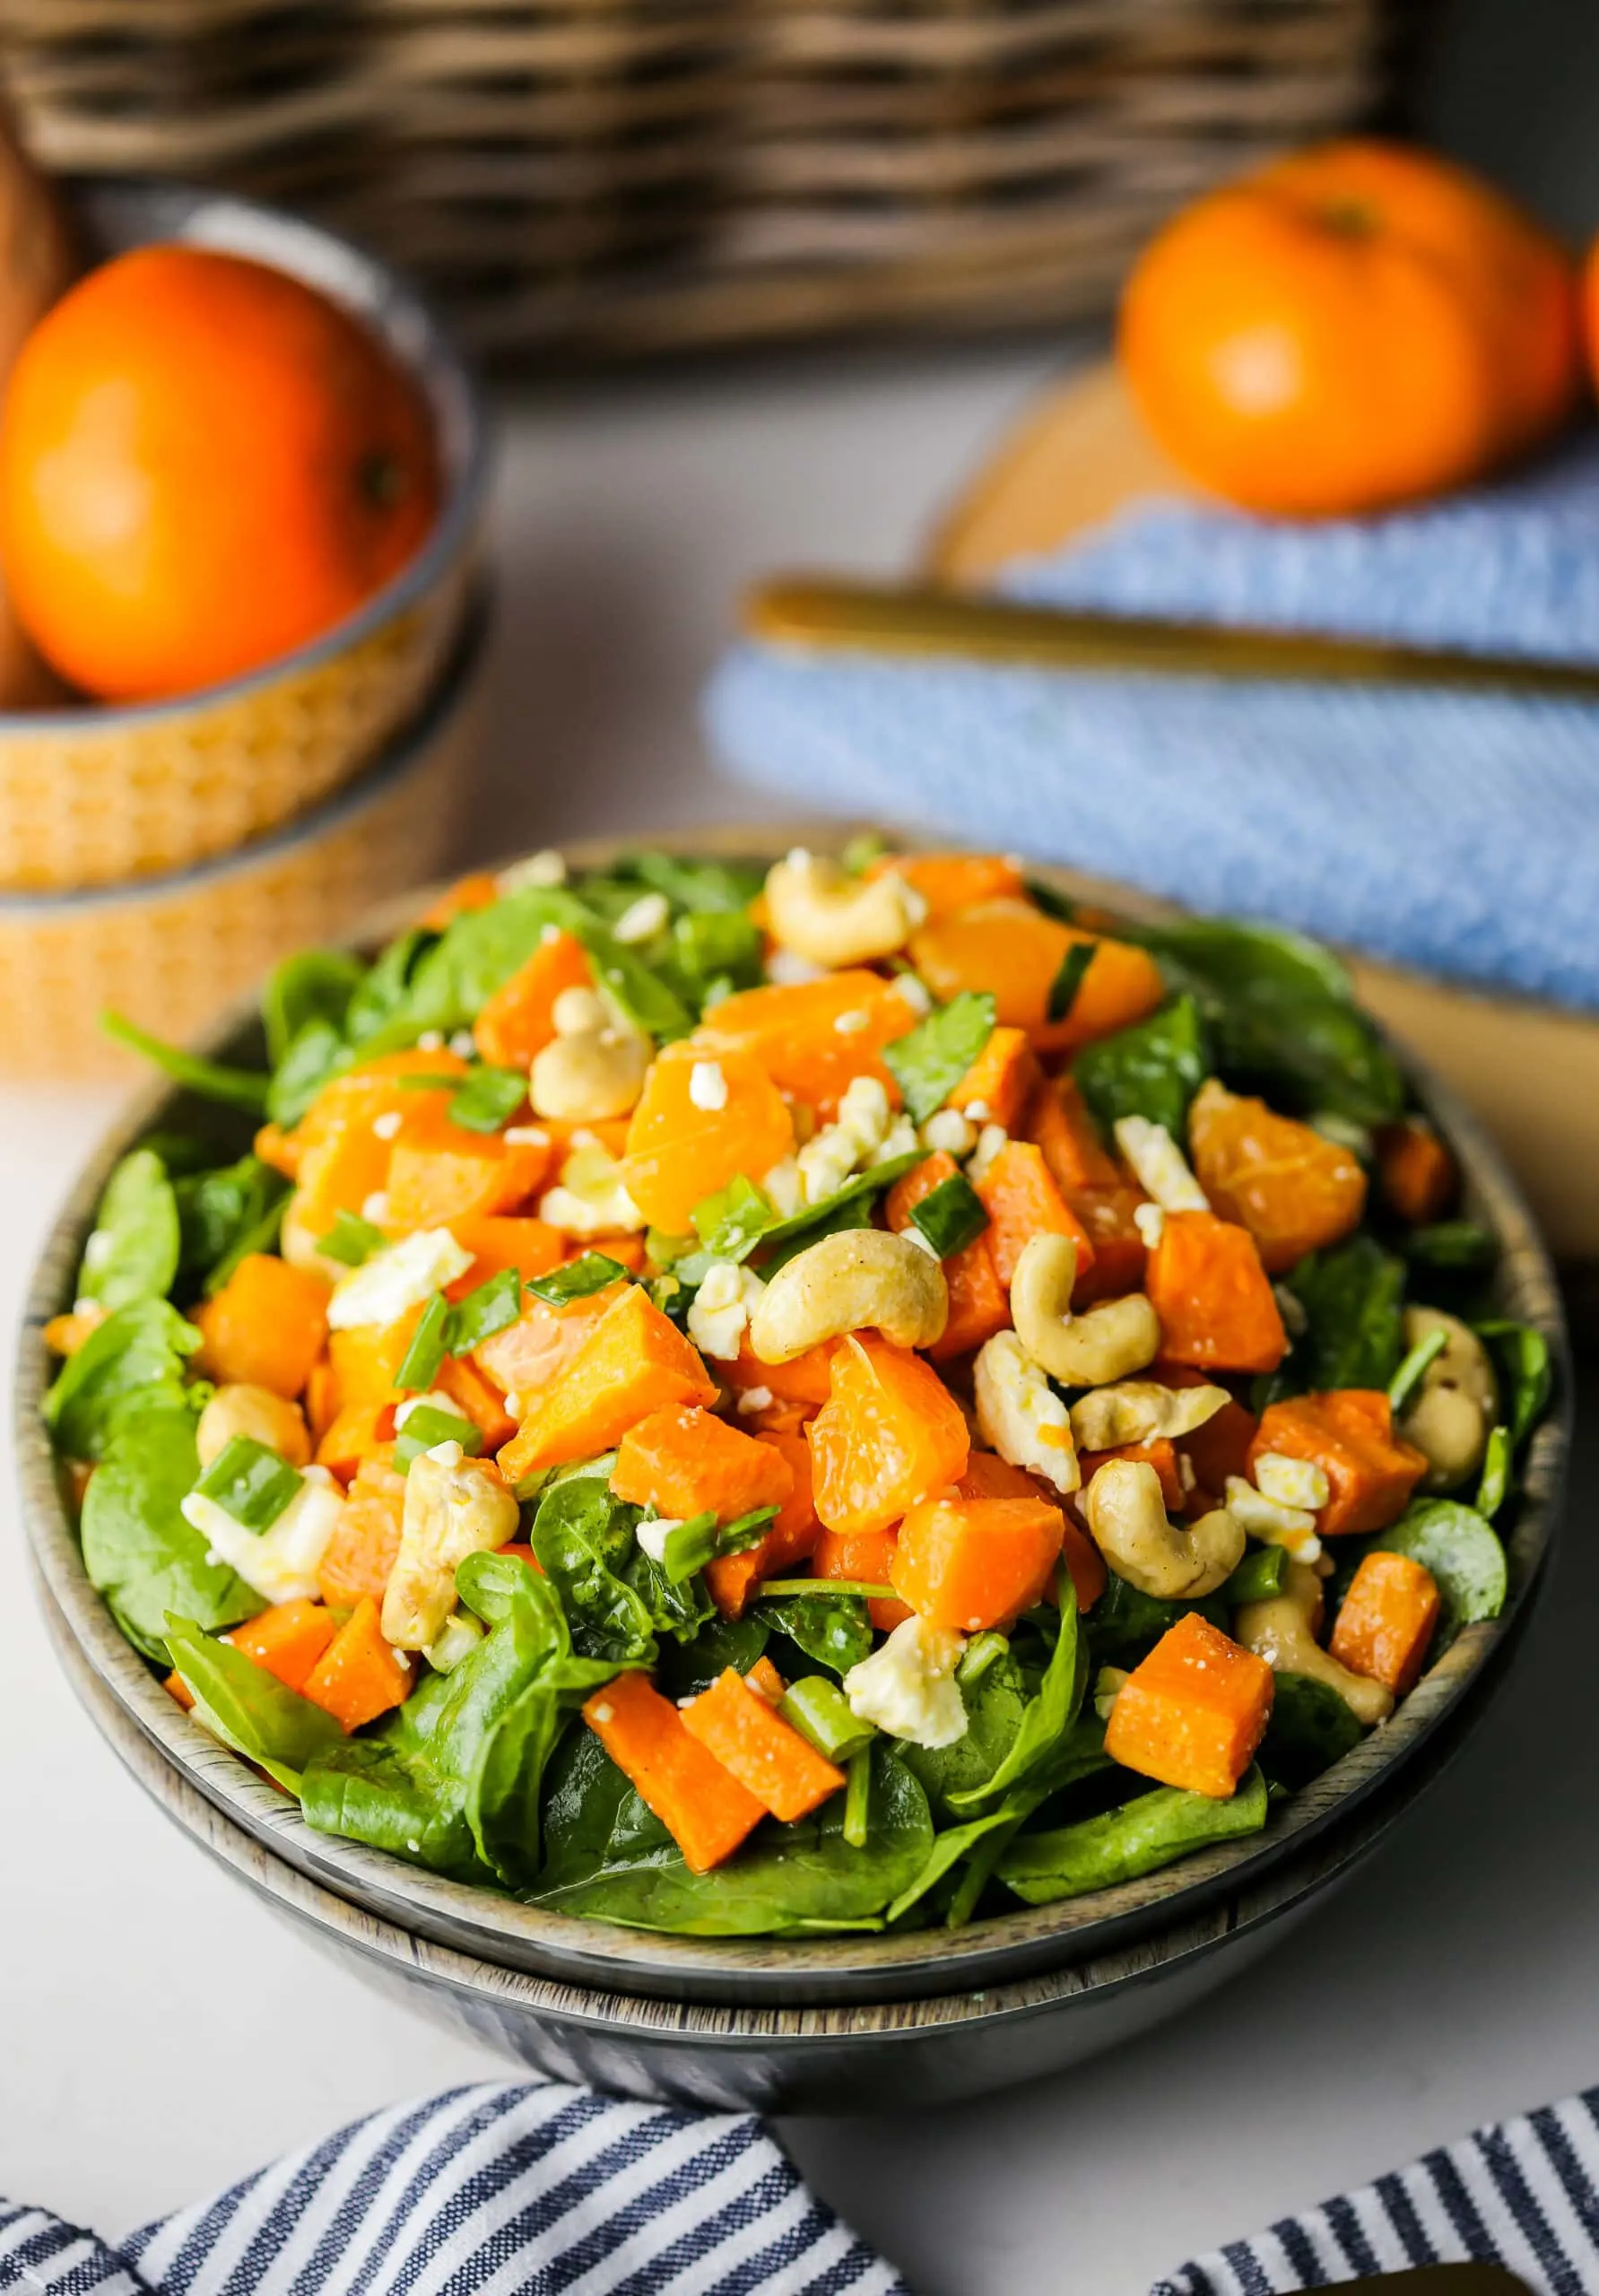 Sweet potato orange spinach salad in a wooden bowl.